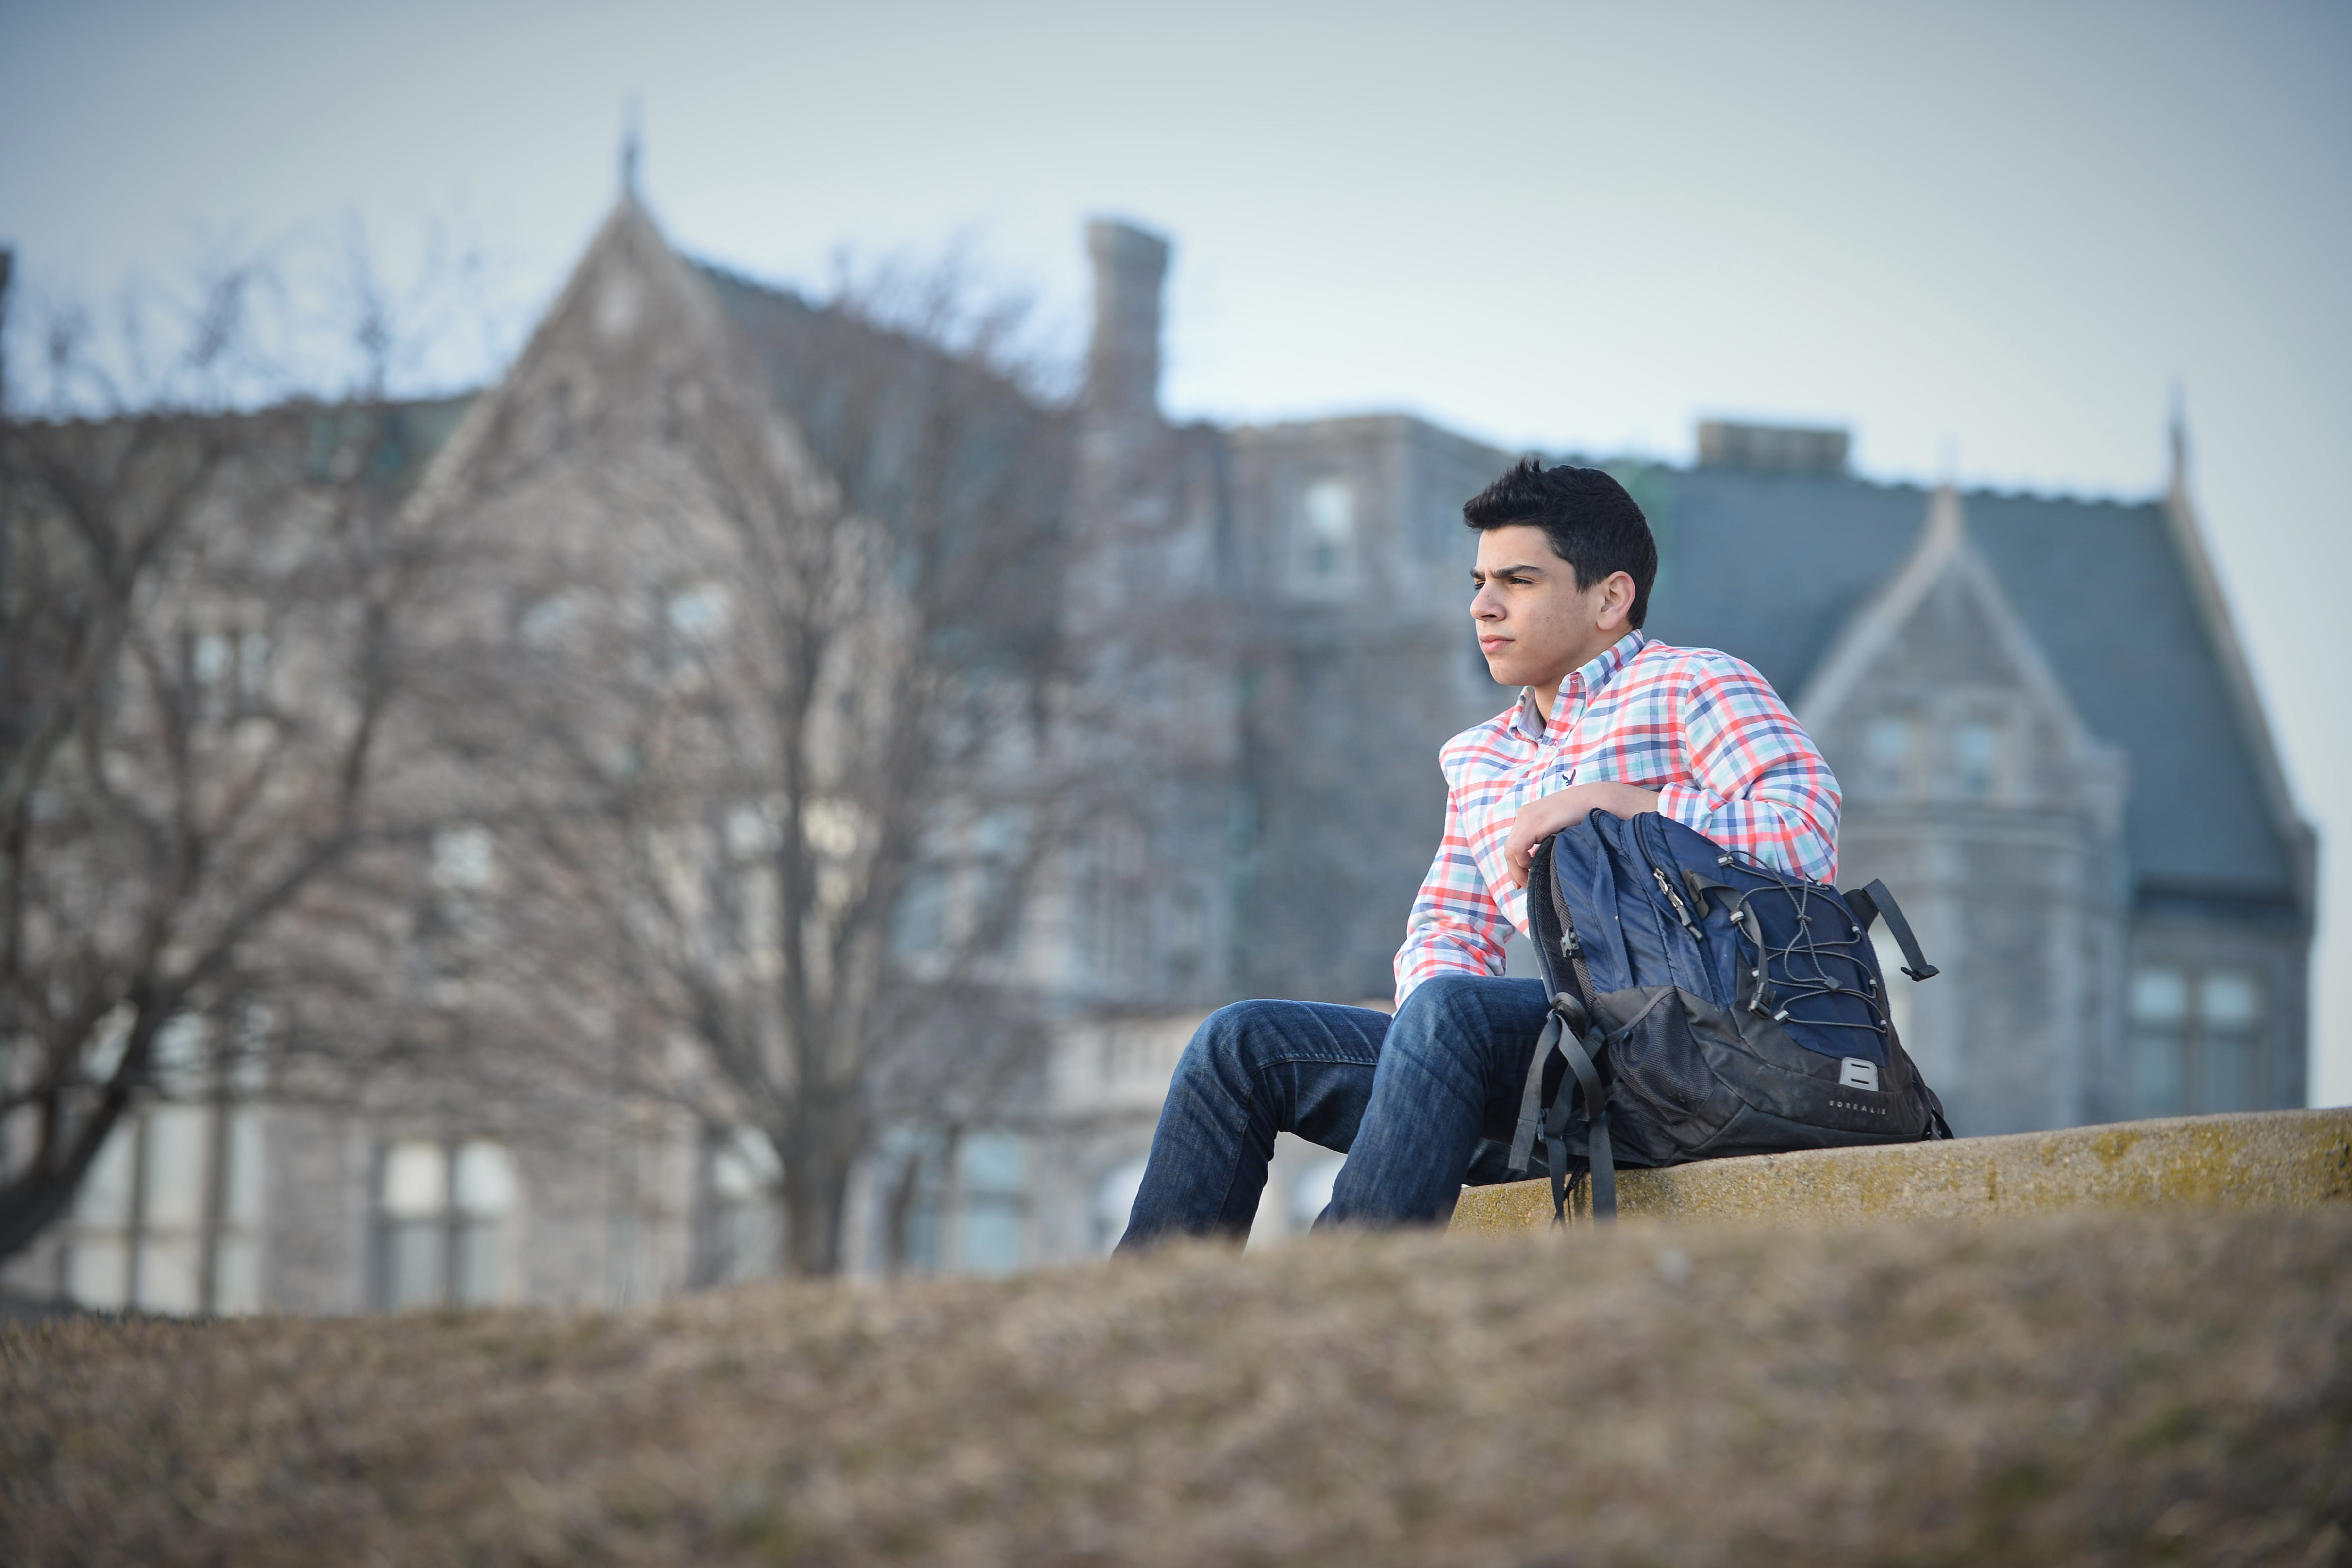 Mohammad Mansour, the youngest of six siblings to pursue undergraduate studies at the Avery Point campus, likes to end each day watching the sun set across Long Island Sound. (Peter Morenus/UConn Photo)